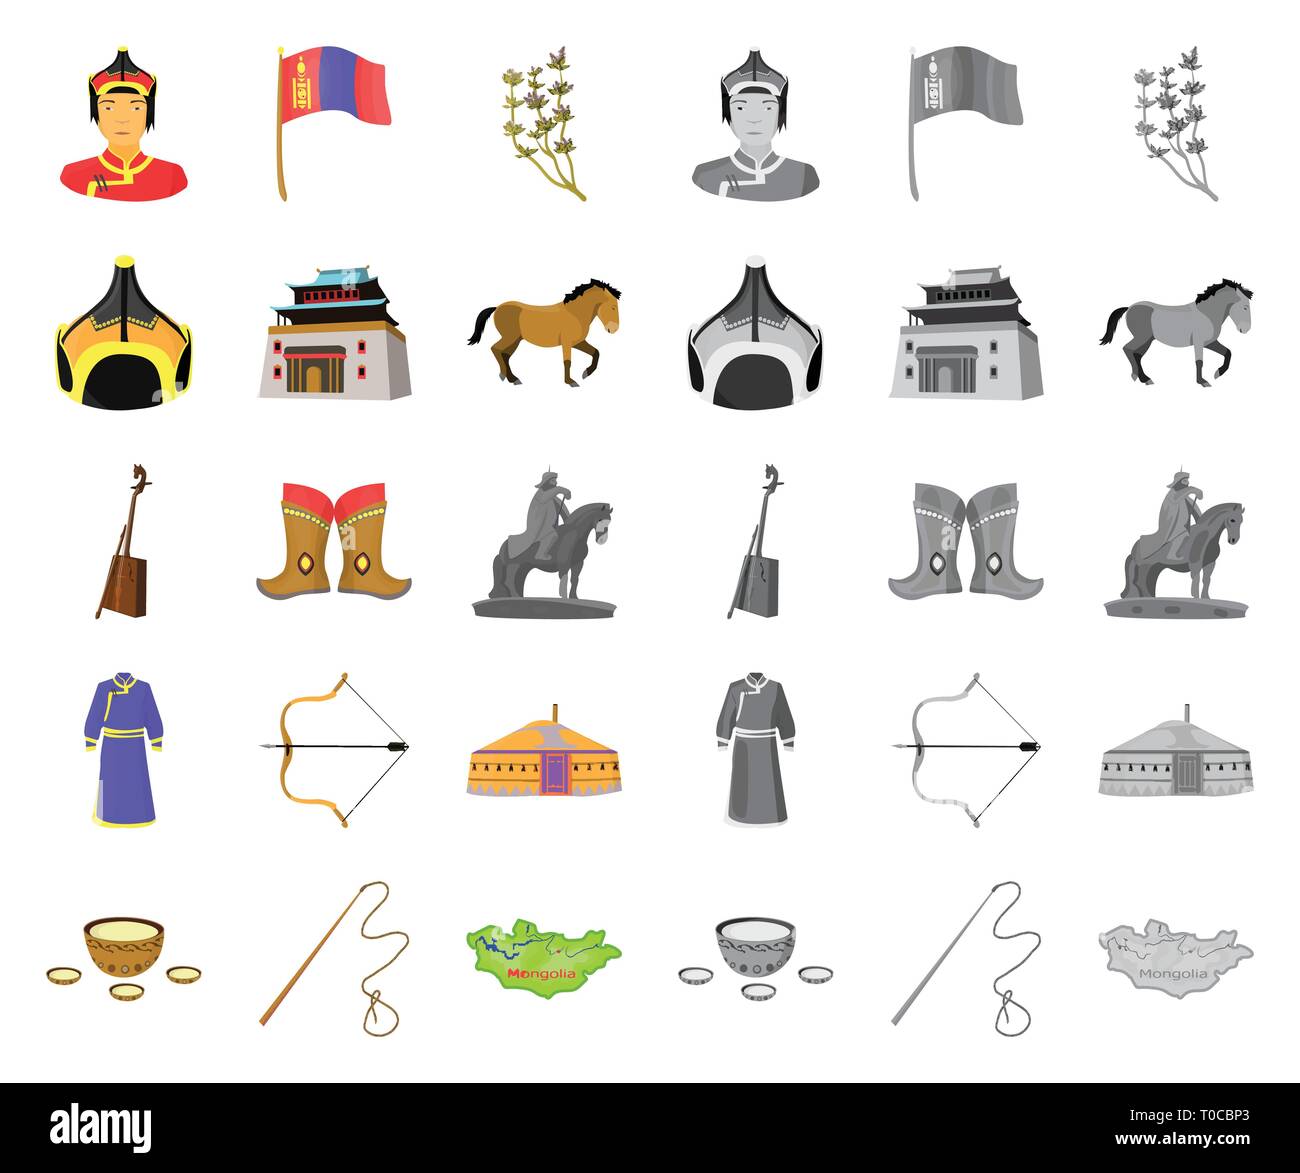 arms,arrow,belt,bow,buddhism,building,cartoon,mono,cashmere,coat,collection,country,culture,flag,flower,fur,genghis,gutuly,headdress,horse,hudak,icon,illustration,instrument,khan,kialis,kumis,landmark,leather,map,monastery,mongol,mongolia,monument,musical,nature,religion,robe,set,shoes,sign,spear,temple,territory,tradition,travel,vector,whip,wool,yurt Vector Vectors , Stock Vector